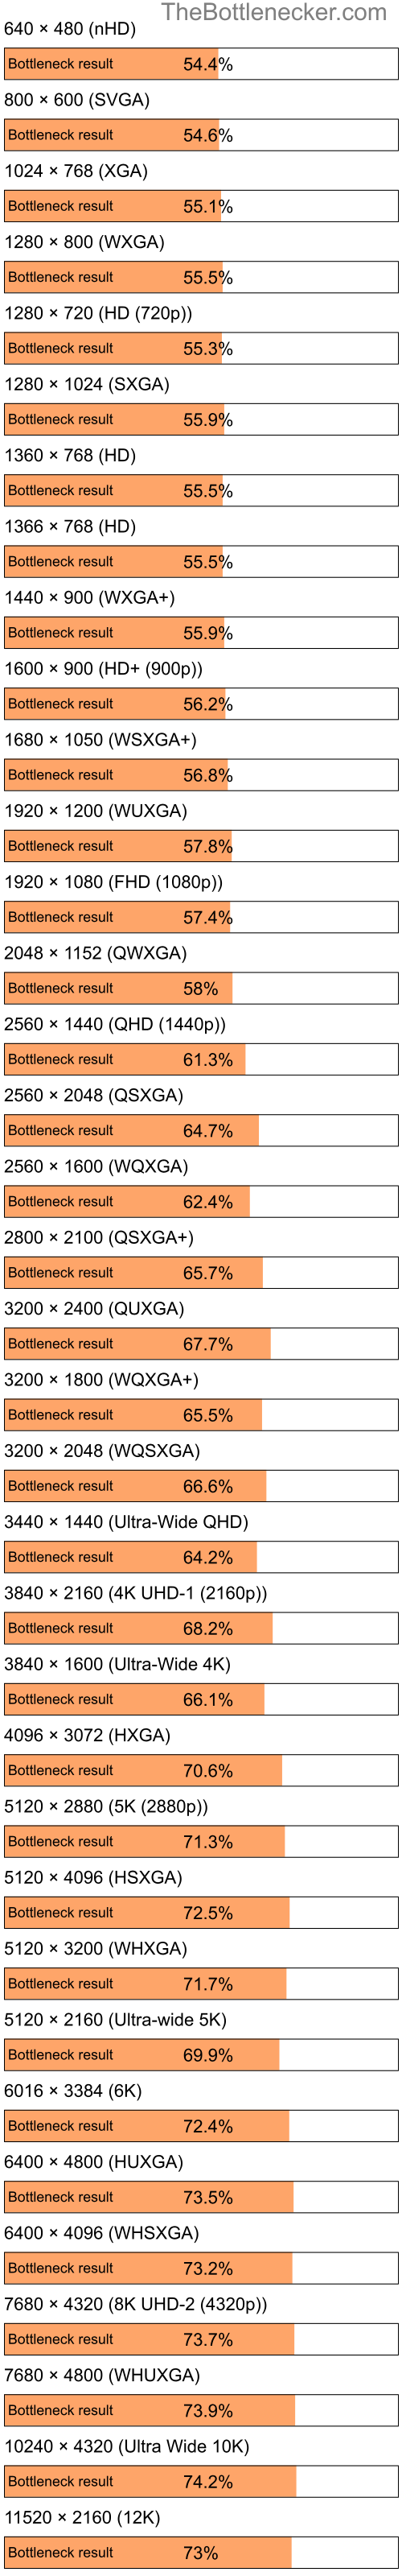 Bottleneck results by resolution for Intel Celeron M 410 and AMD Mobility Radeon HD 4200 in Processor Intense Tasks